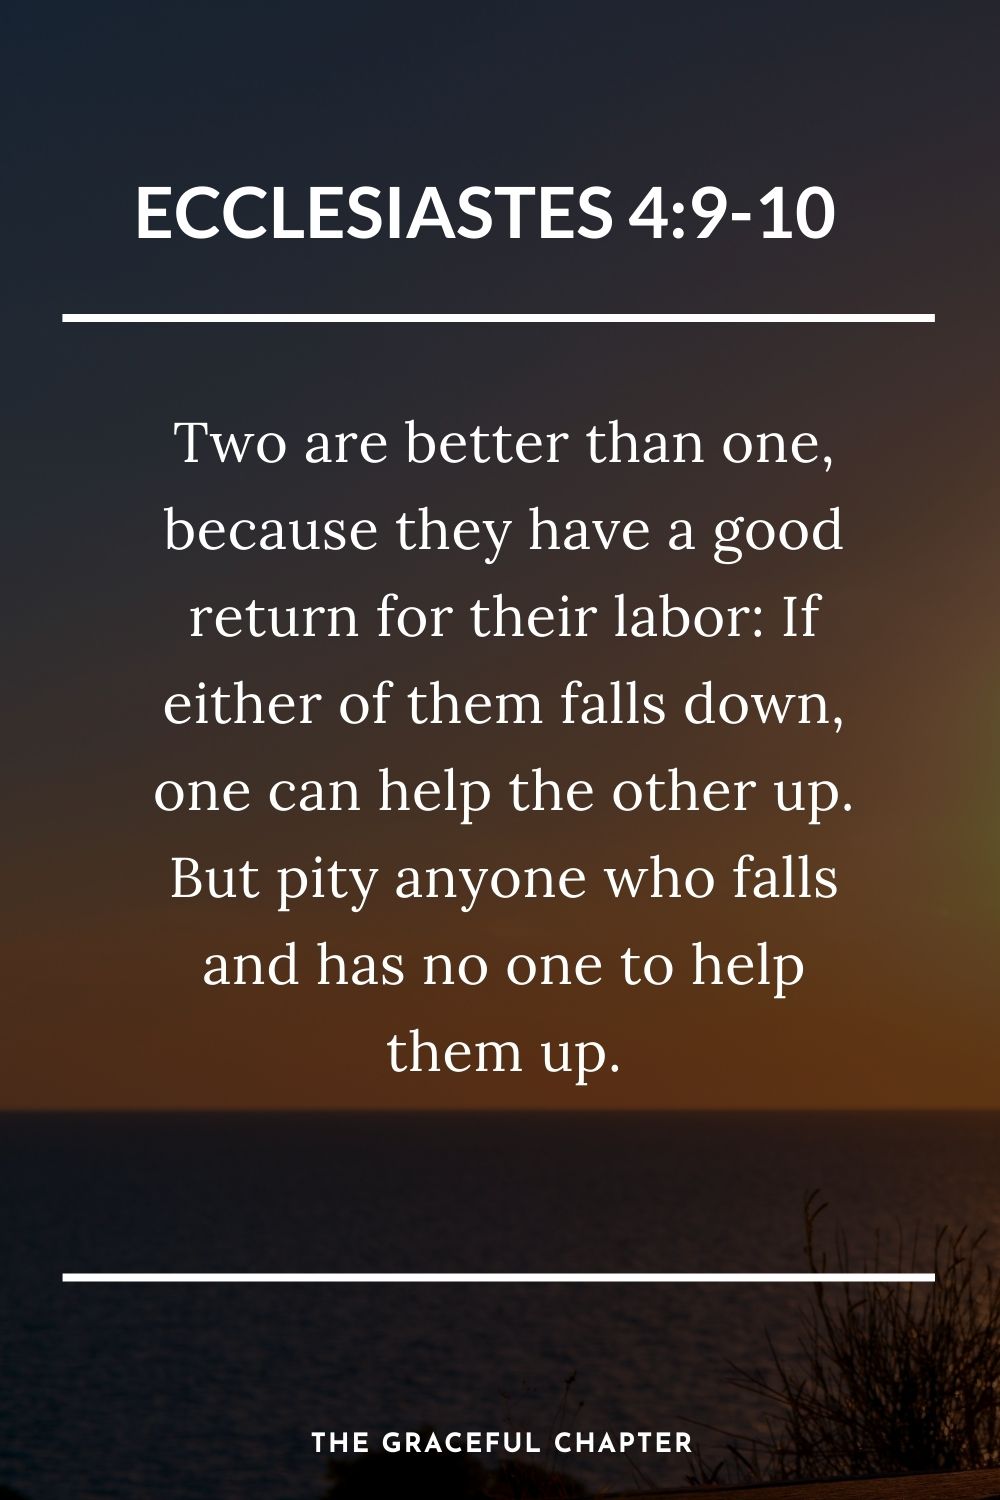 Two are better than one, because they have a good return for their labor: If either of them falls down, one can help the other up. But pity anyone who falls and has no one to help them up. Ecclesiastes 4:9-10